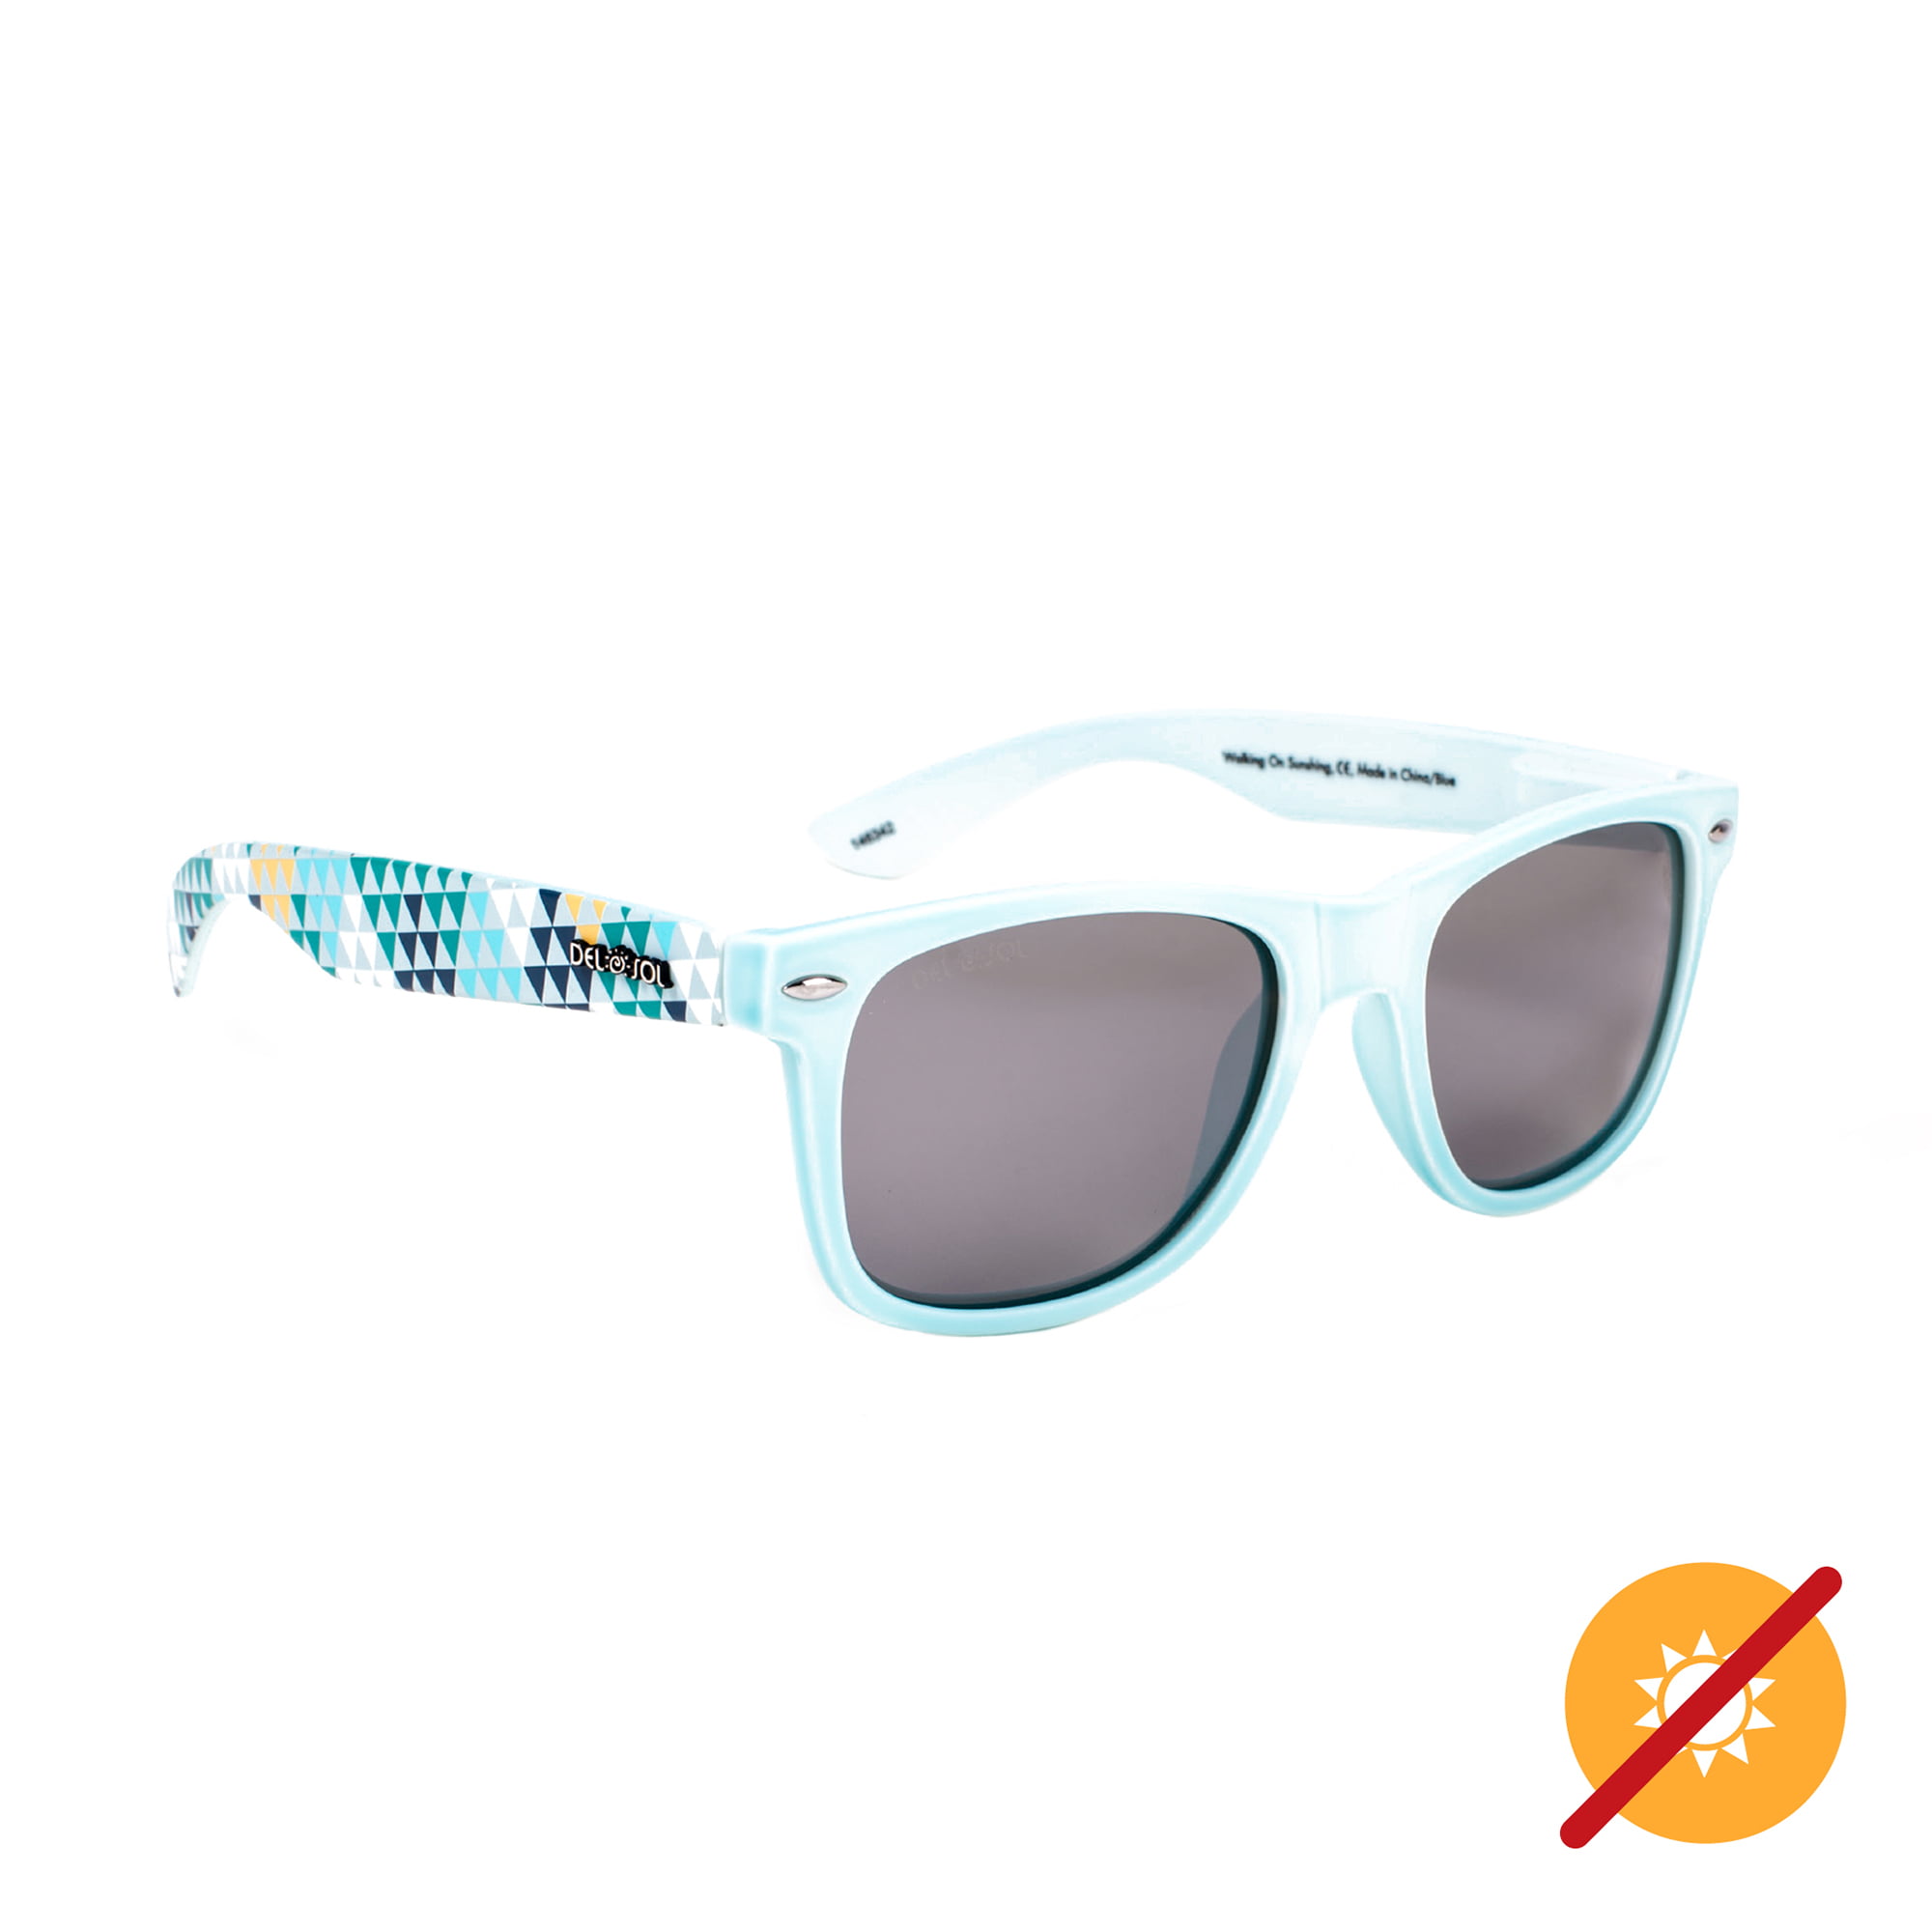 Del Sol Solize Color-Changing Unisex Sunglasses - Walking on Sunshine -  Changes Color from Light Blue to Blue in the Sun - Polarized Pro, Mirrored  Lens, 100% UVA/UVB Protection - Walmart.com